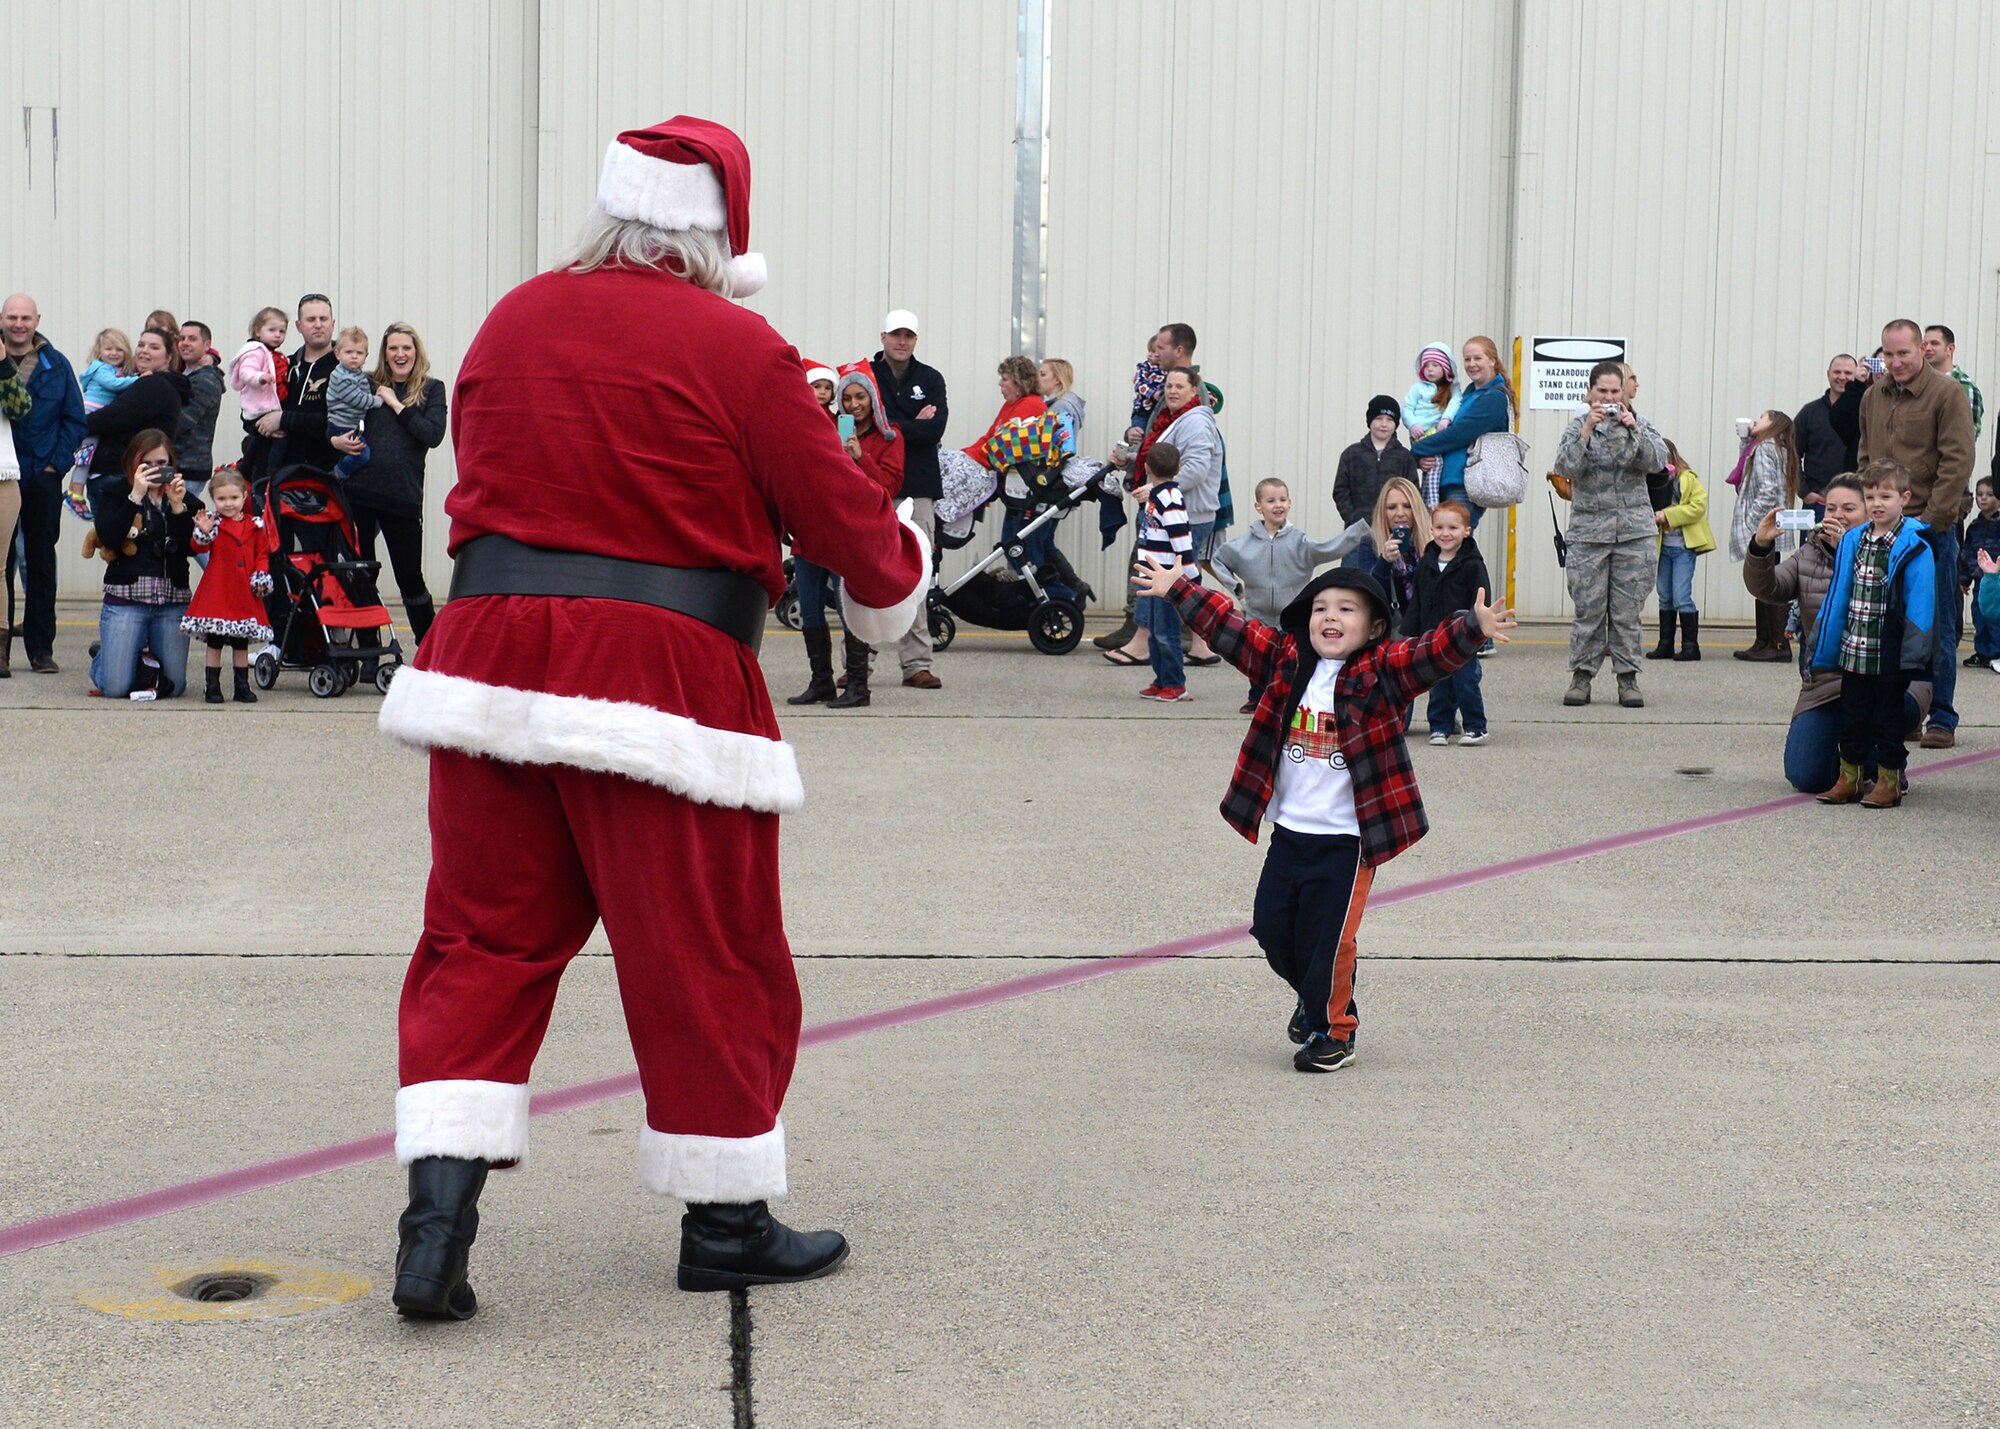 A child of Team Beale runs to Santa Clause during the annual Children's Holiday Party Dec. 12, 2015, at Beale Air Force Base, California. Thousands of presents were donated by multiple suppliers and were handed out to the children of Team Beale. In addition, the event included photos with Santa Clause and his elves, a raffle and various holiday activities. (U.S. Air Force photo by Airman 1st Class Ramon A. Adelan)